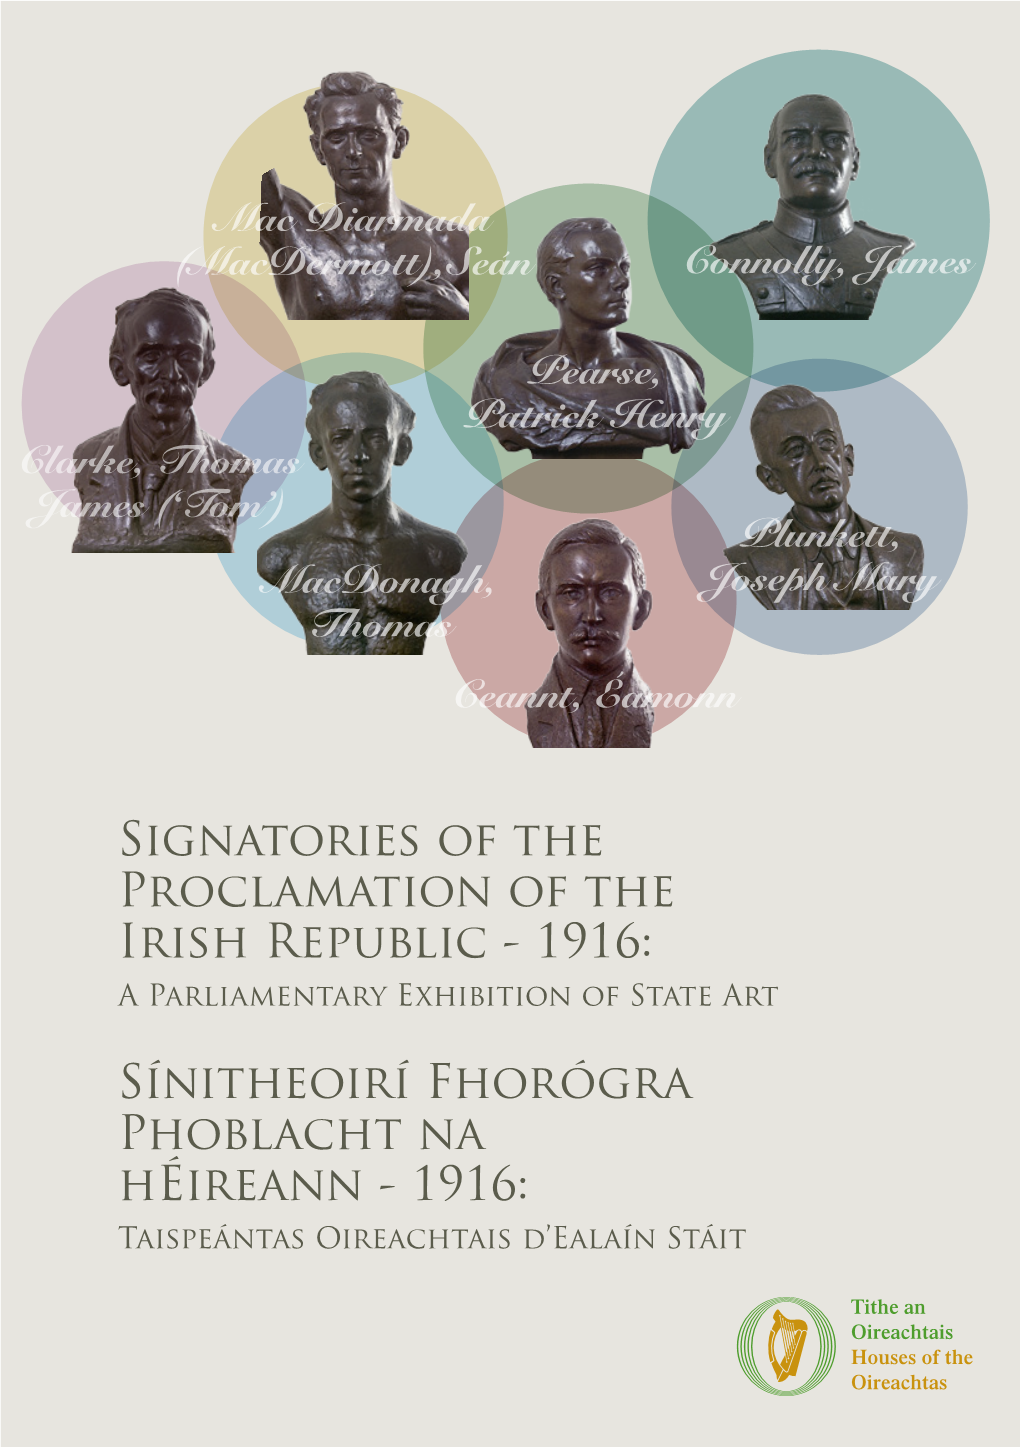 Signatories of the Proclamation of the Irish Republic - 1916: a Parliamentary Exhibition of State Art